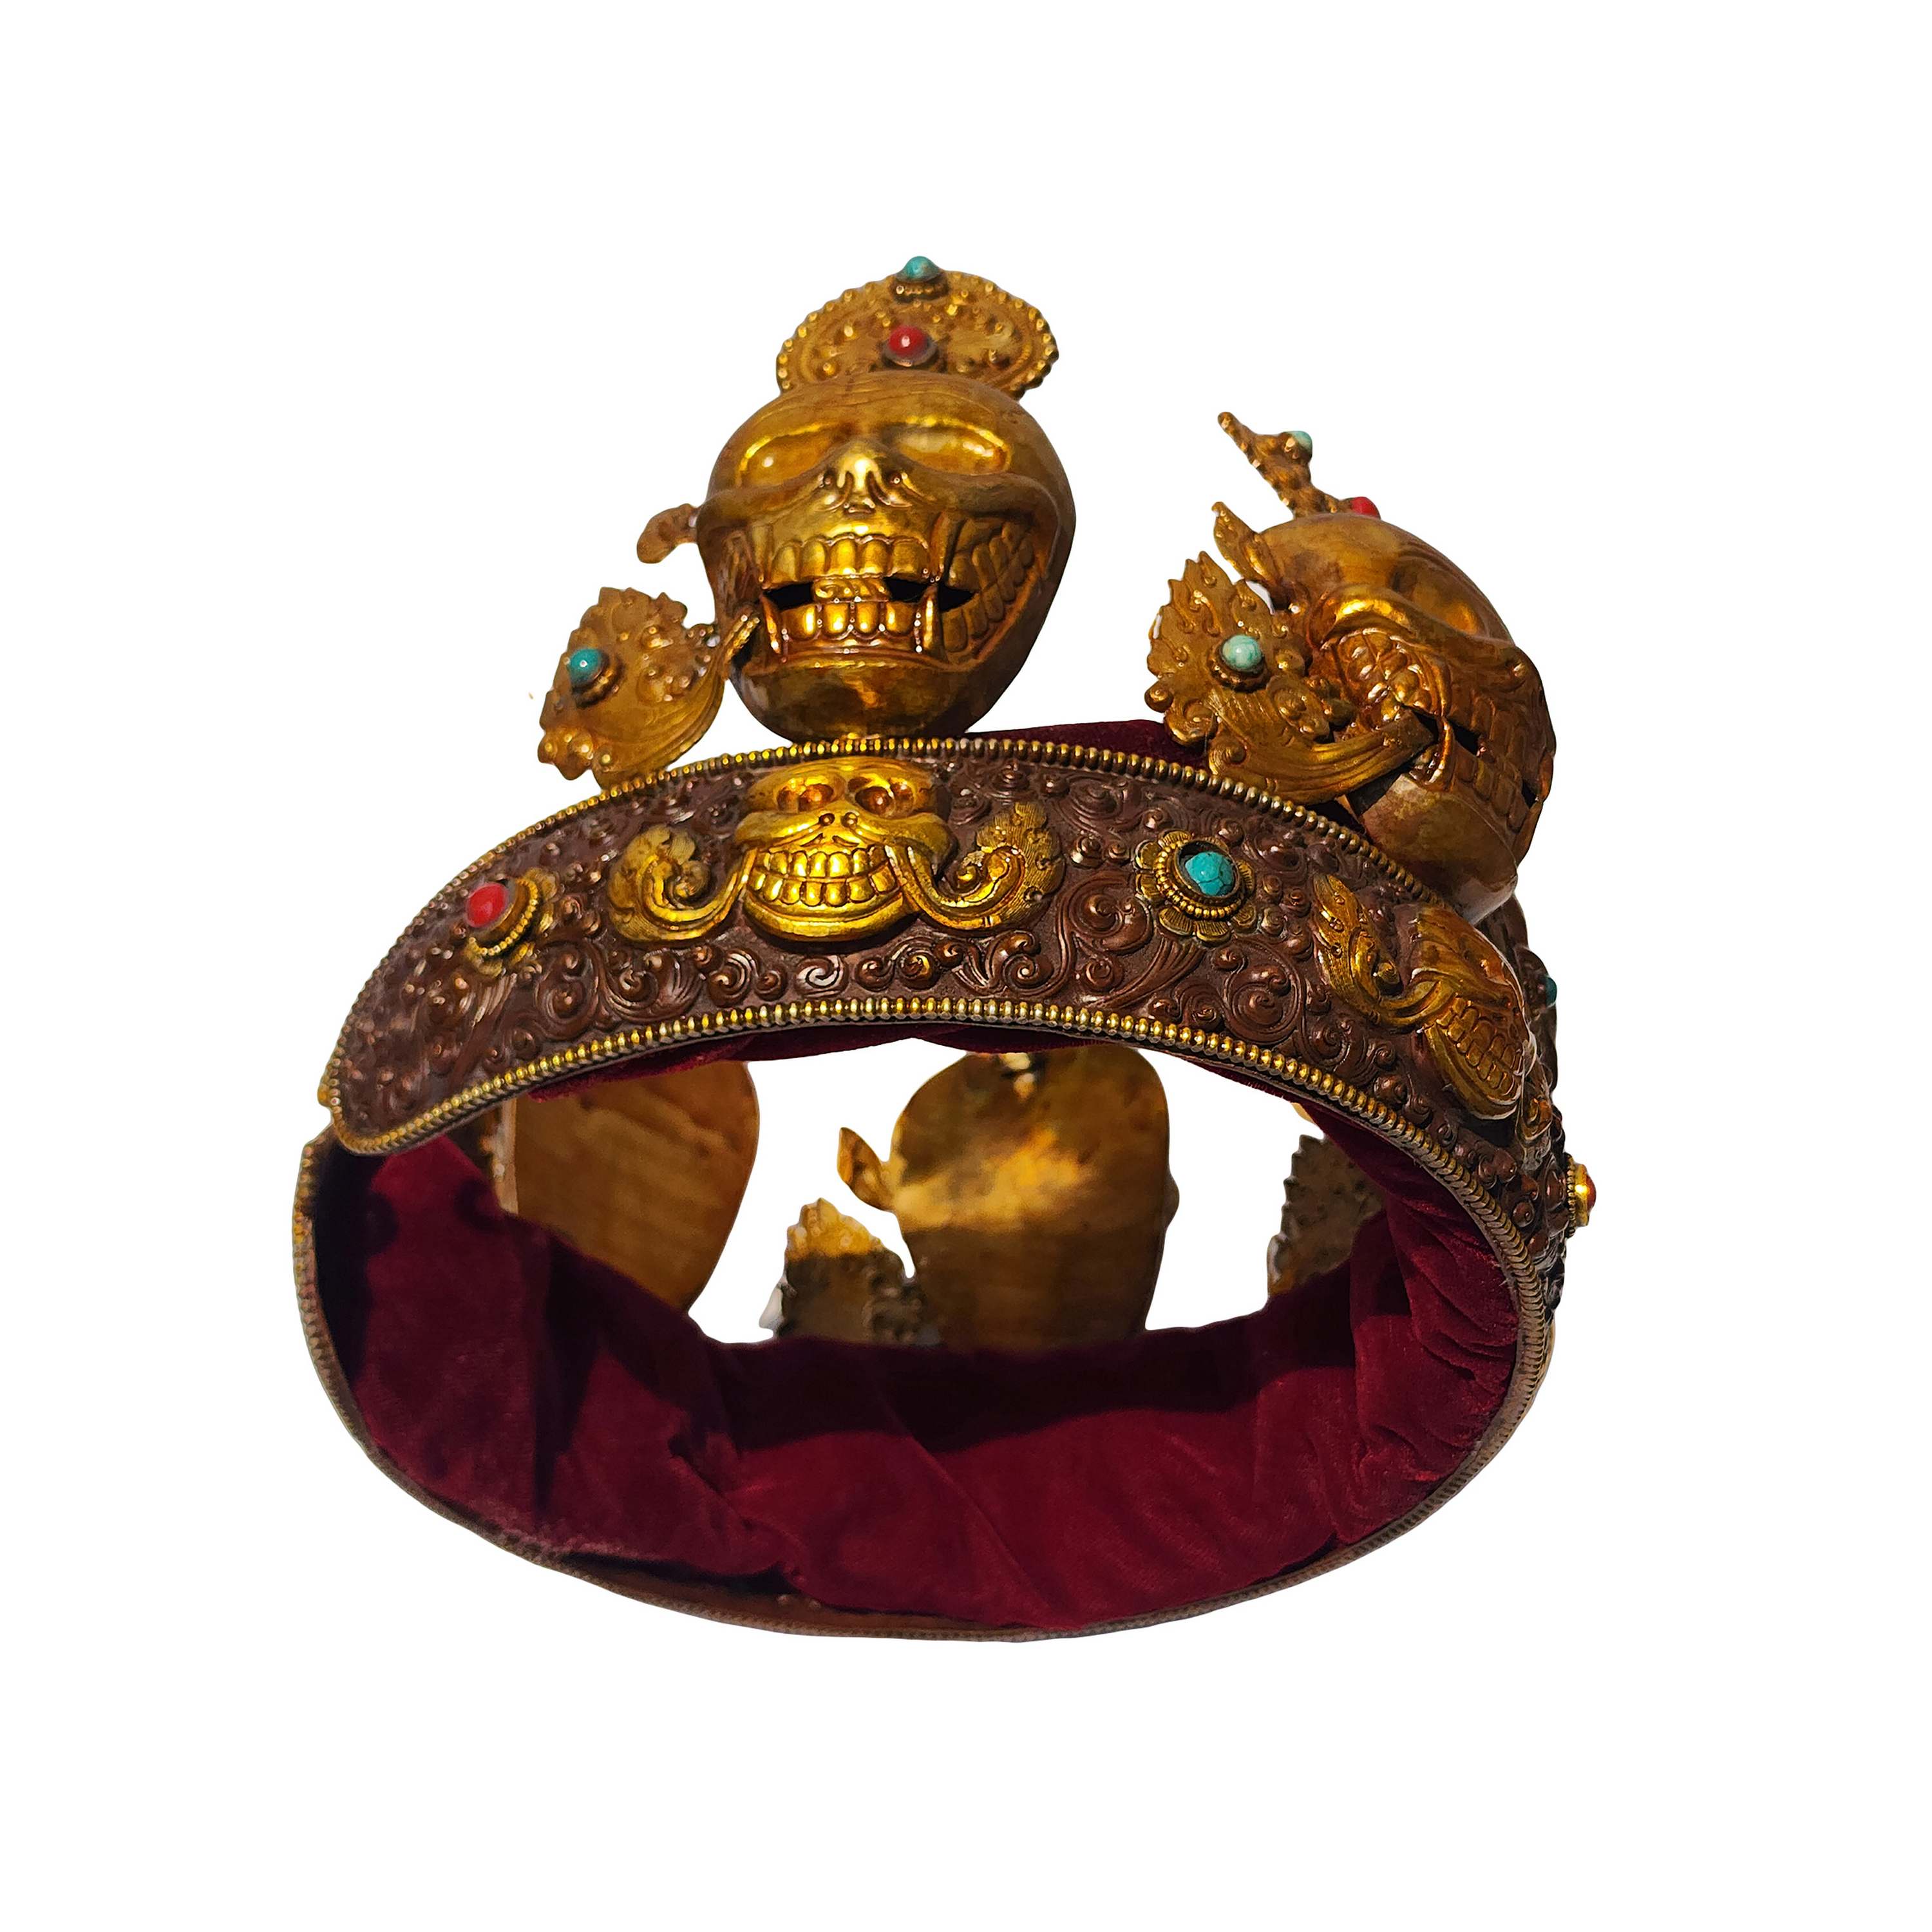 crown With Gem-encrusted, Handmade Buddhist Crown With Skull Design, Copper And Brass, Gold Plated